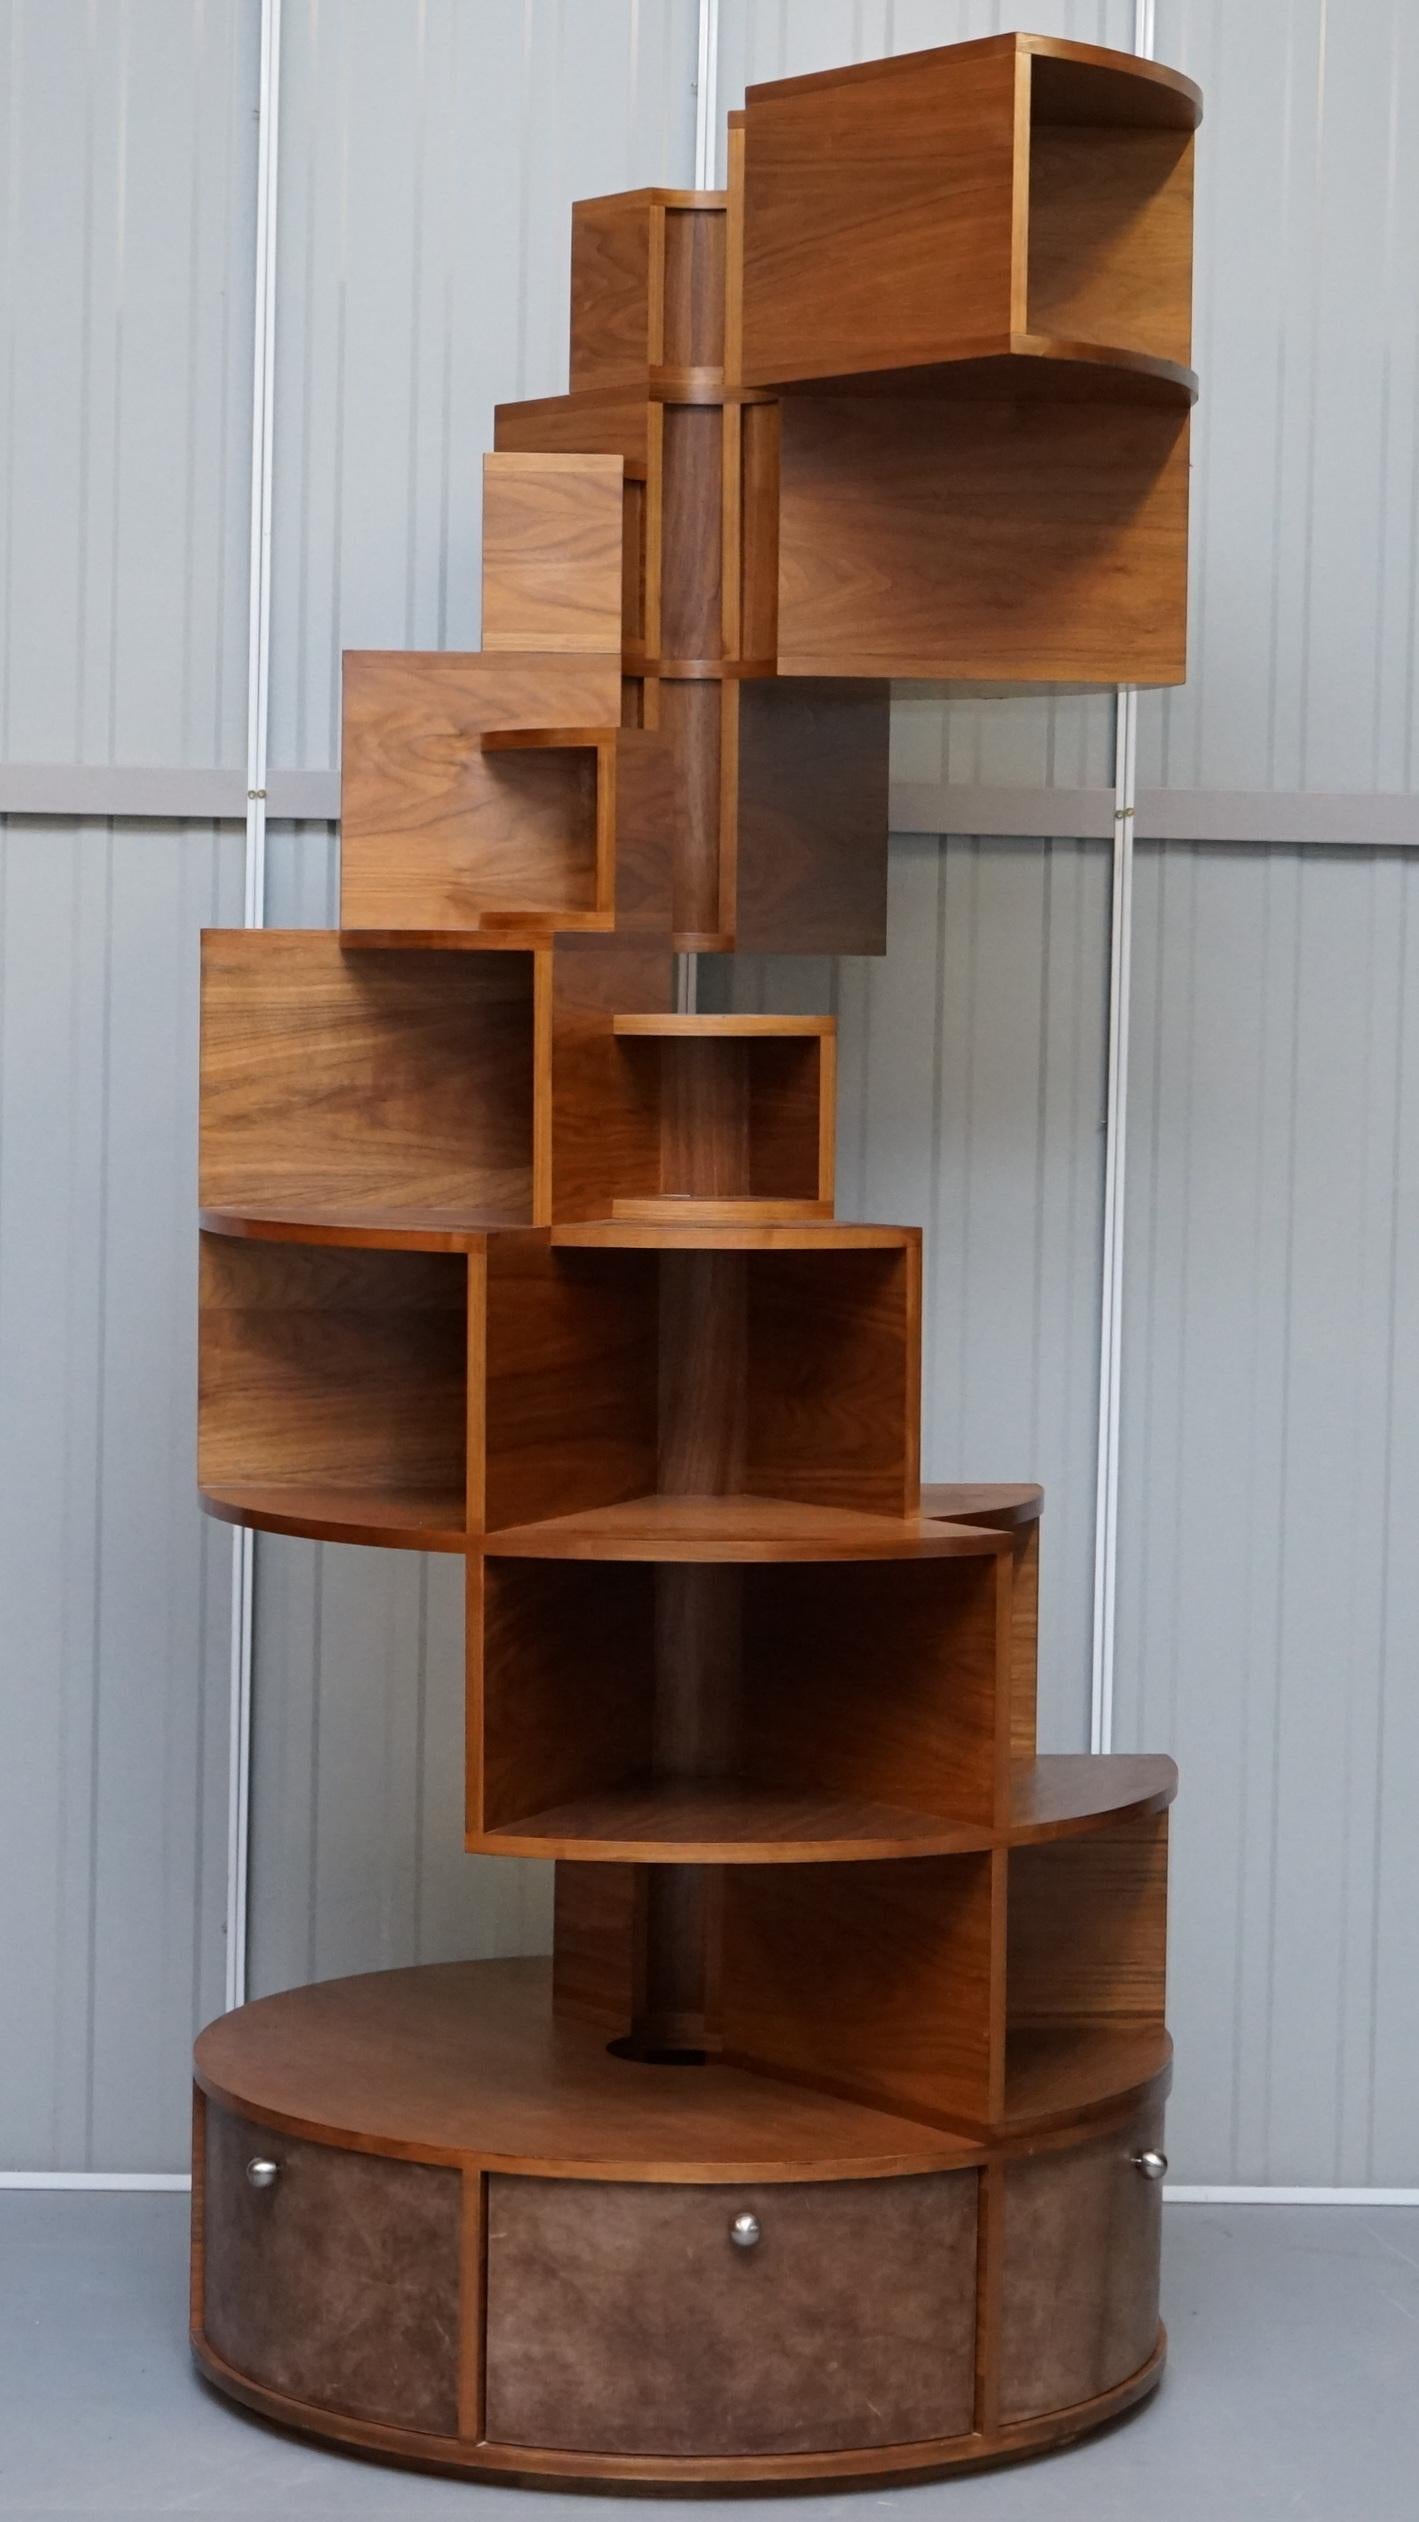 We are delighted to offer for sale this stunning and absolutely huge touch wood revolving bookcase with cupboard base

A monumental piece of furniture, highly decorative, it can be used for books or displaying smalls, the cupboard base offers a